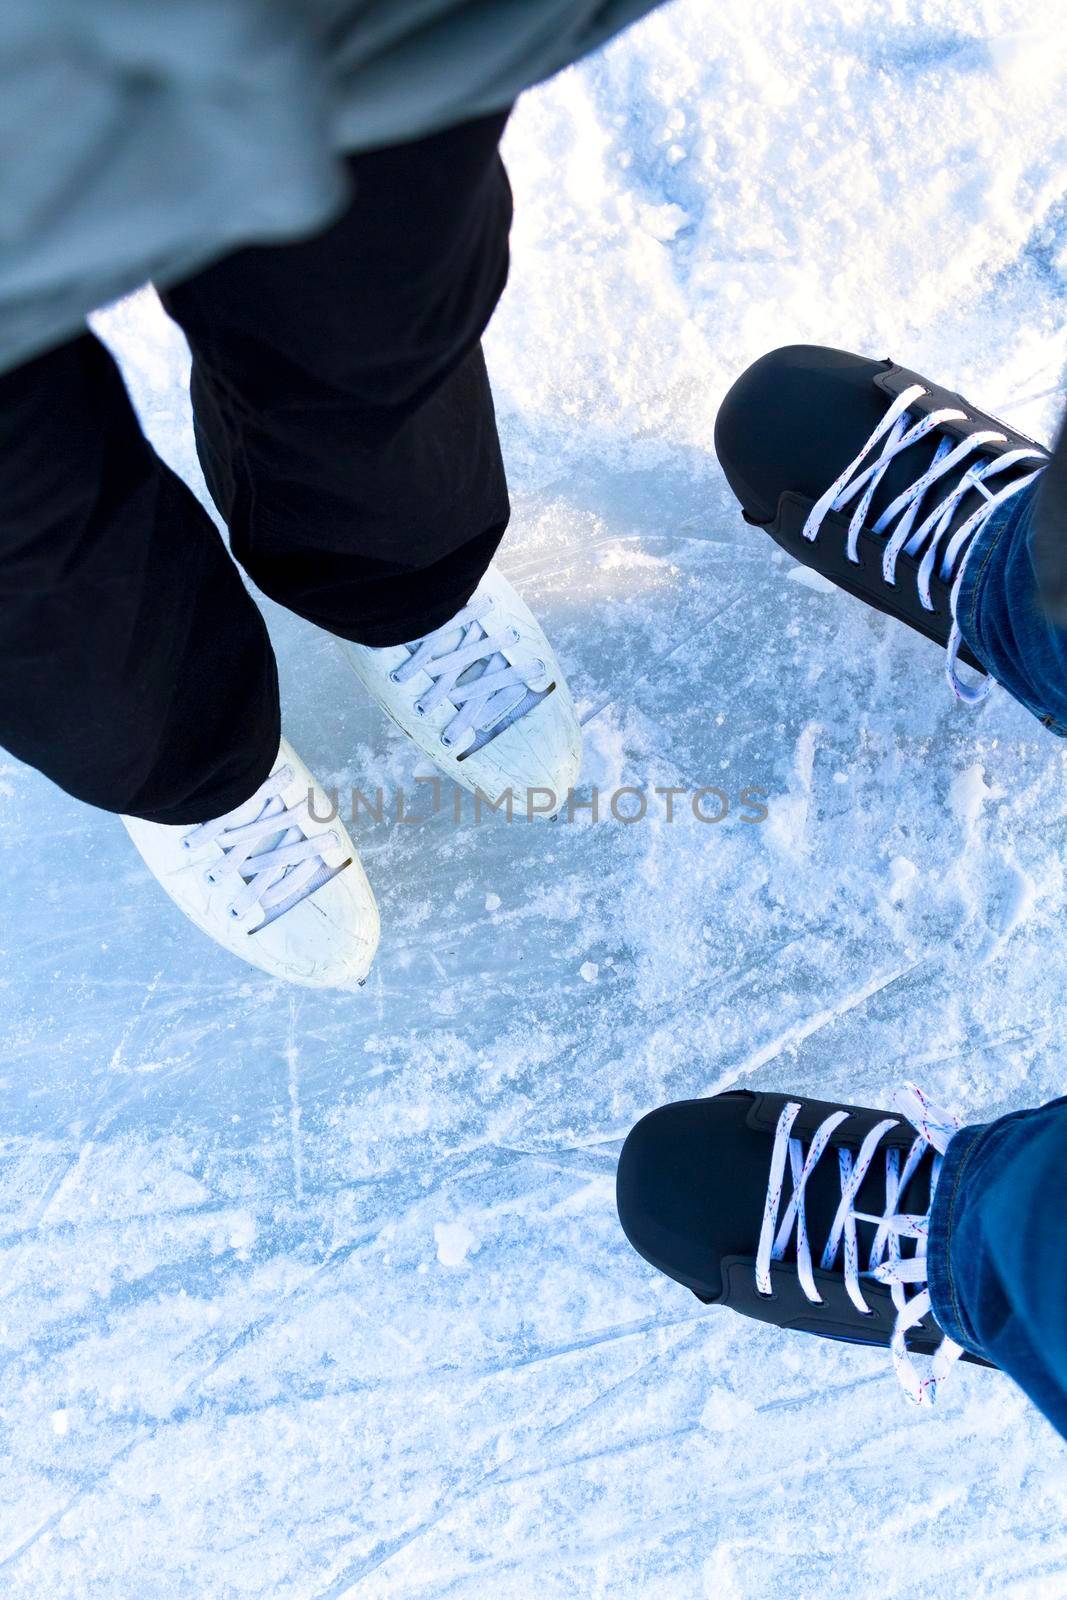 Woman and man together on the ice rink. Winter activities and fun on the ice rink. Ice and feet